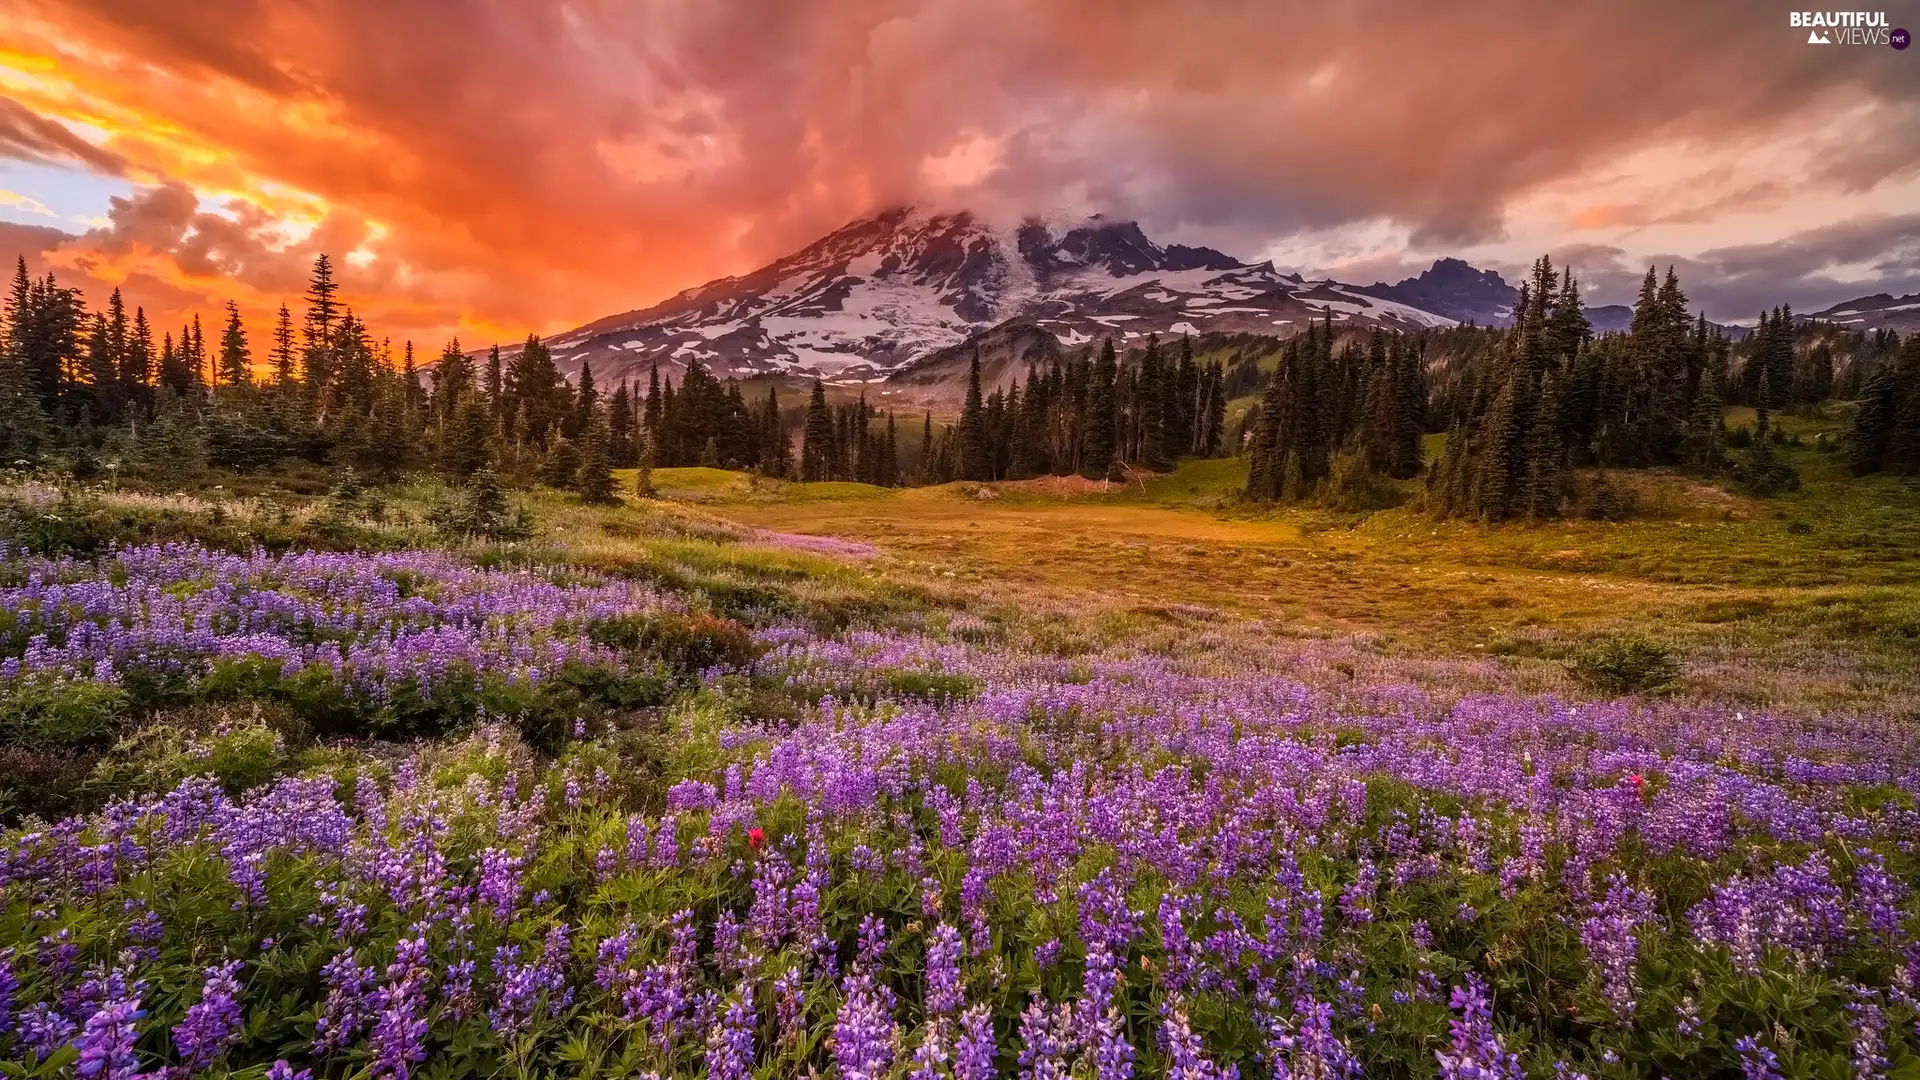 Meadow, clouds, trees, Mount Rainier National Park, viewes, Mountains, Great Sunsets, The United States, lupine, Flowers